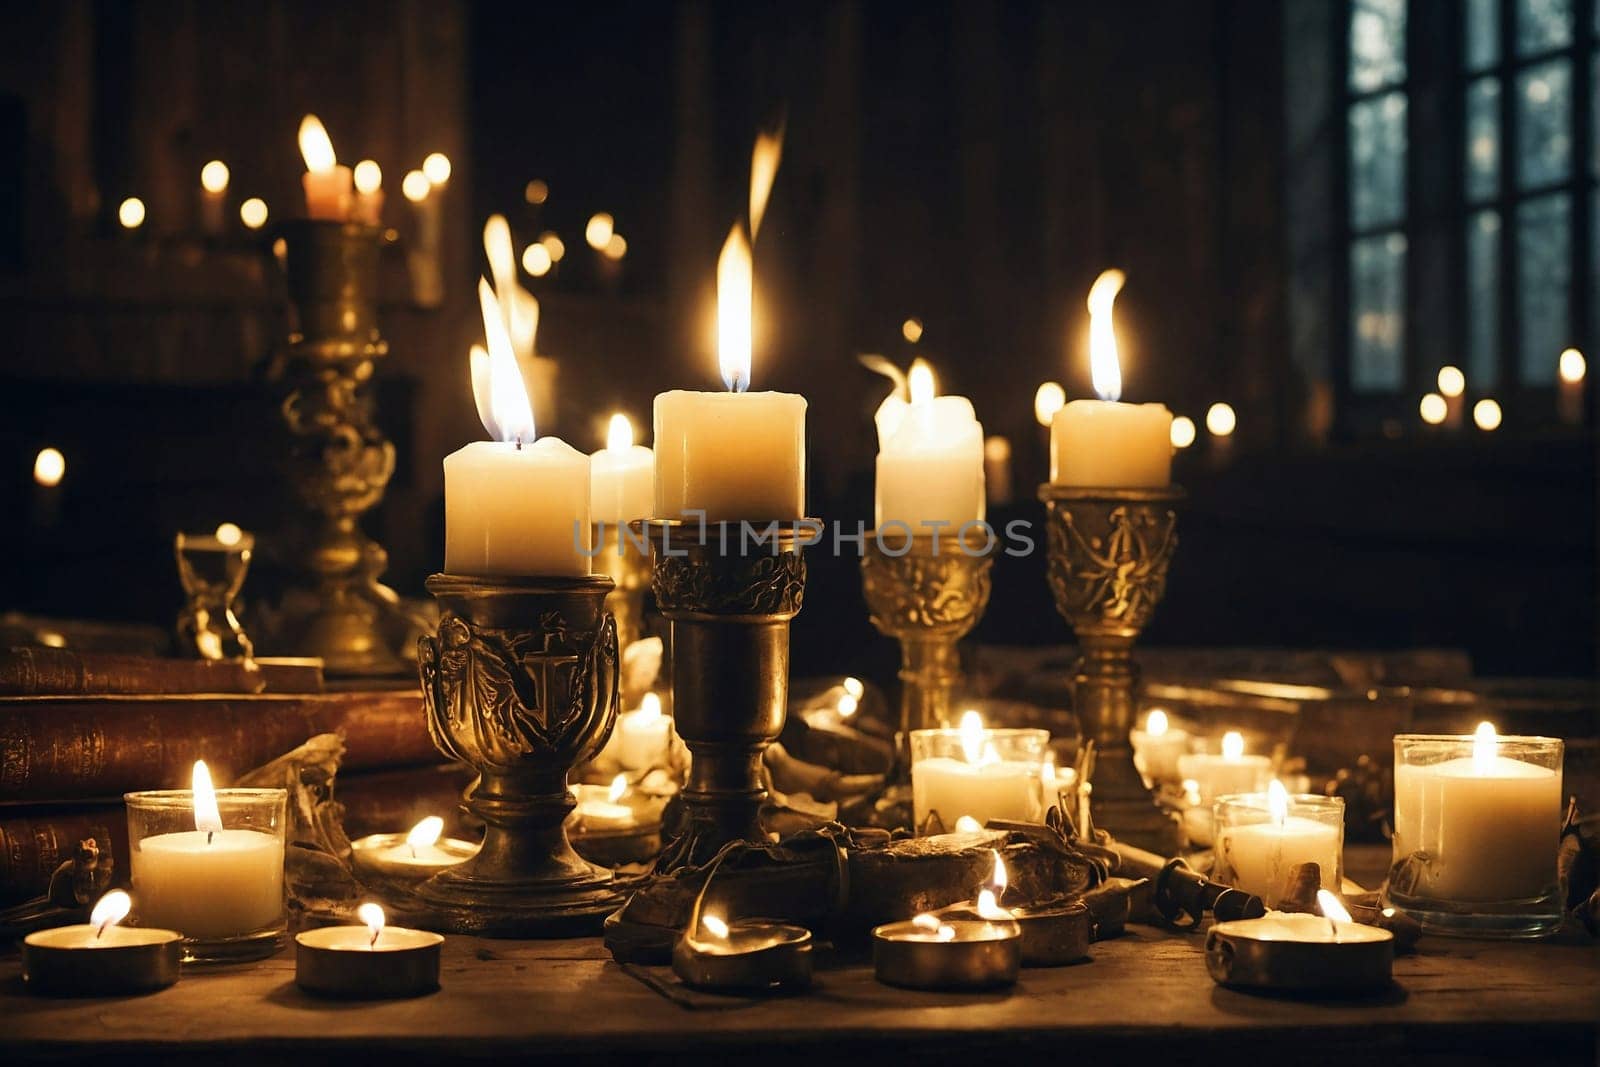 A table adorned with multiple lit candles creating an atmospheric and warm ambiance.